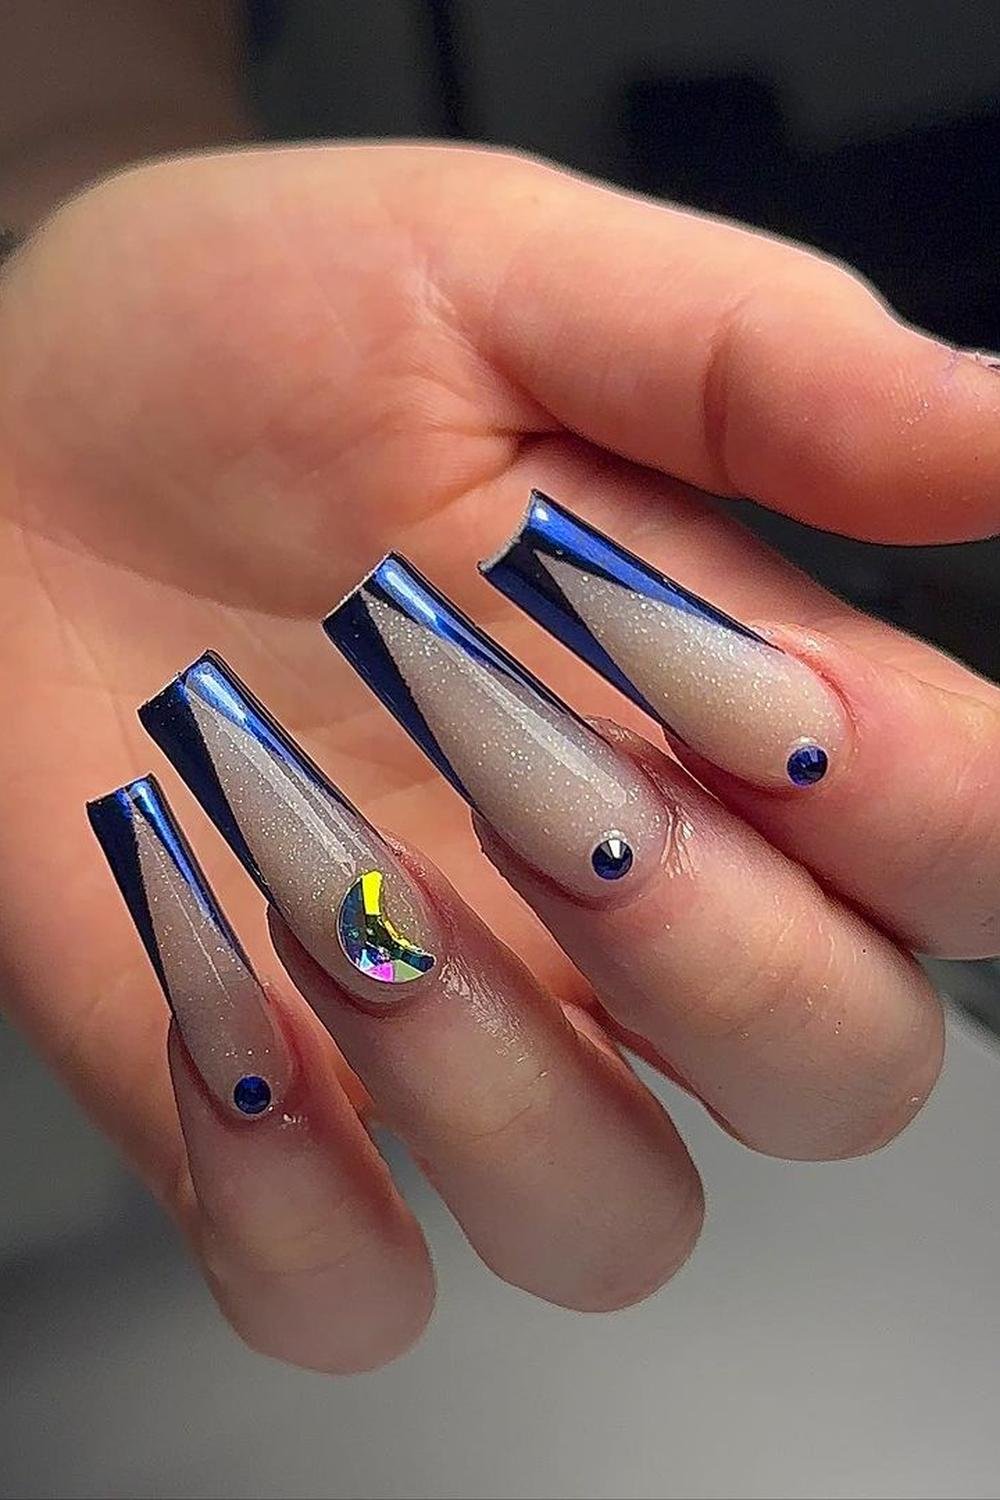 12 - Picture of Blue Chrome Nails